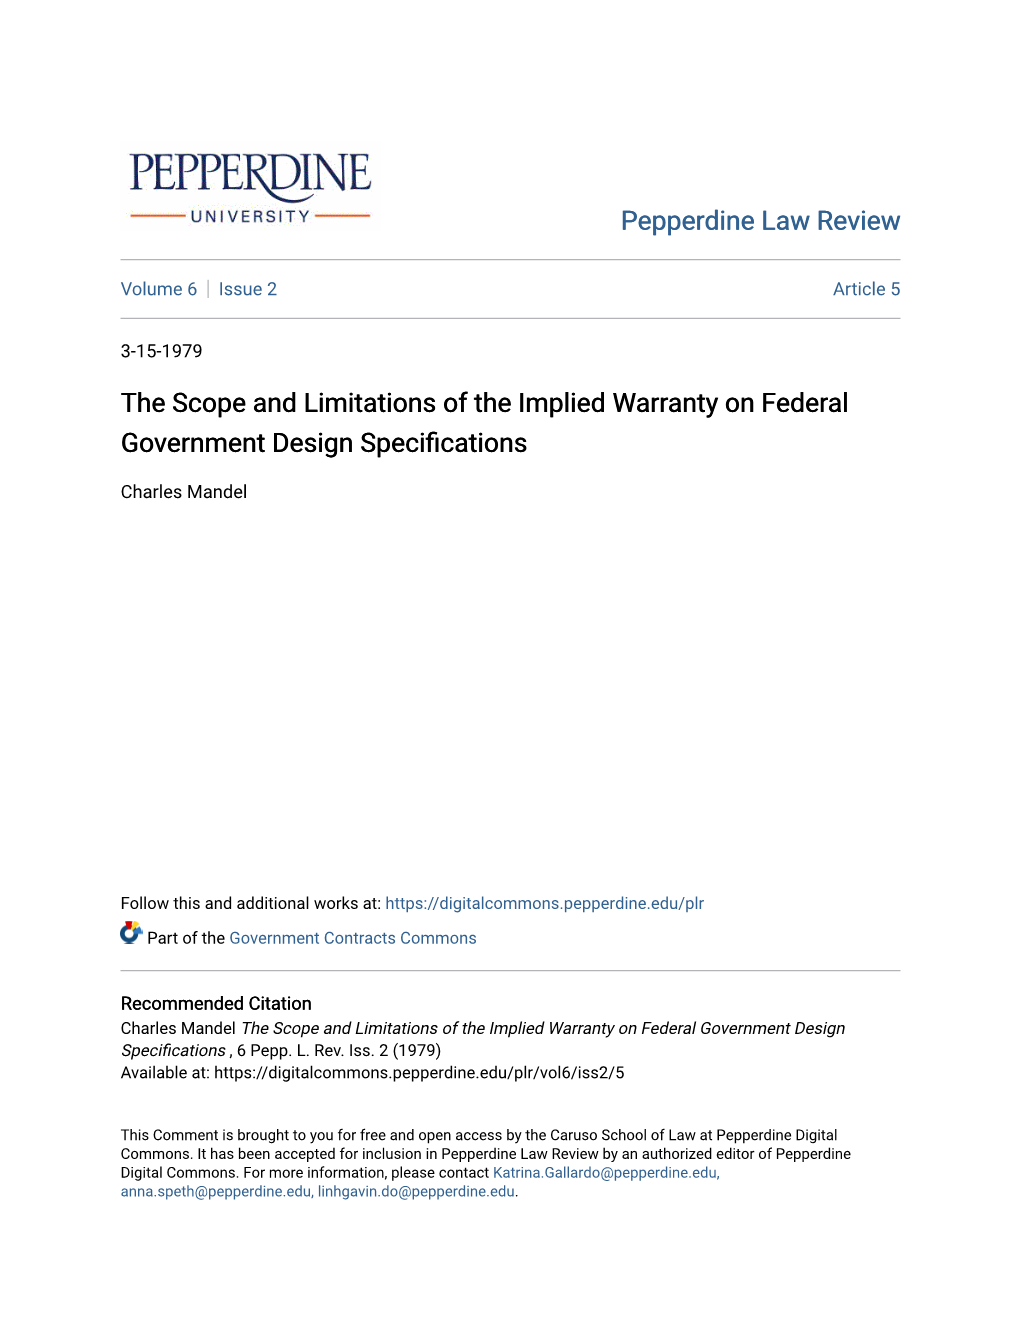 The Scope and Limitations of the Implied Warranty on Federal Government Design Specifications